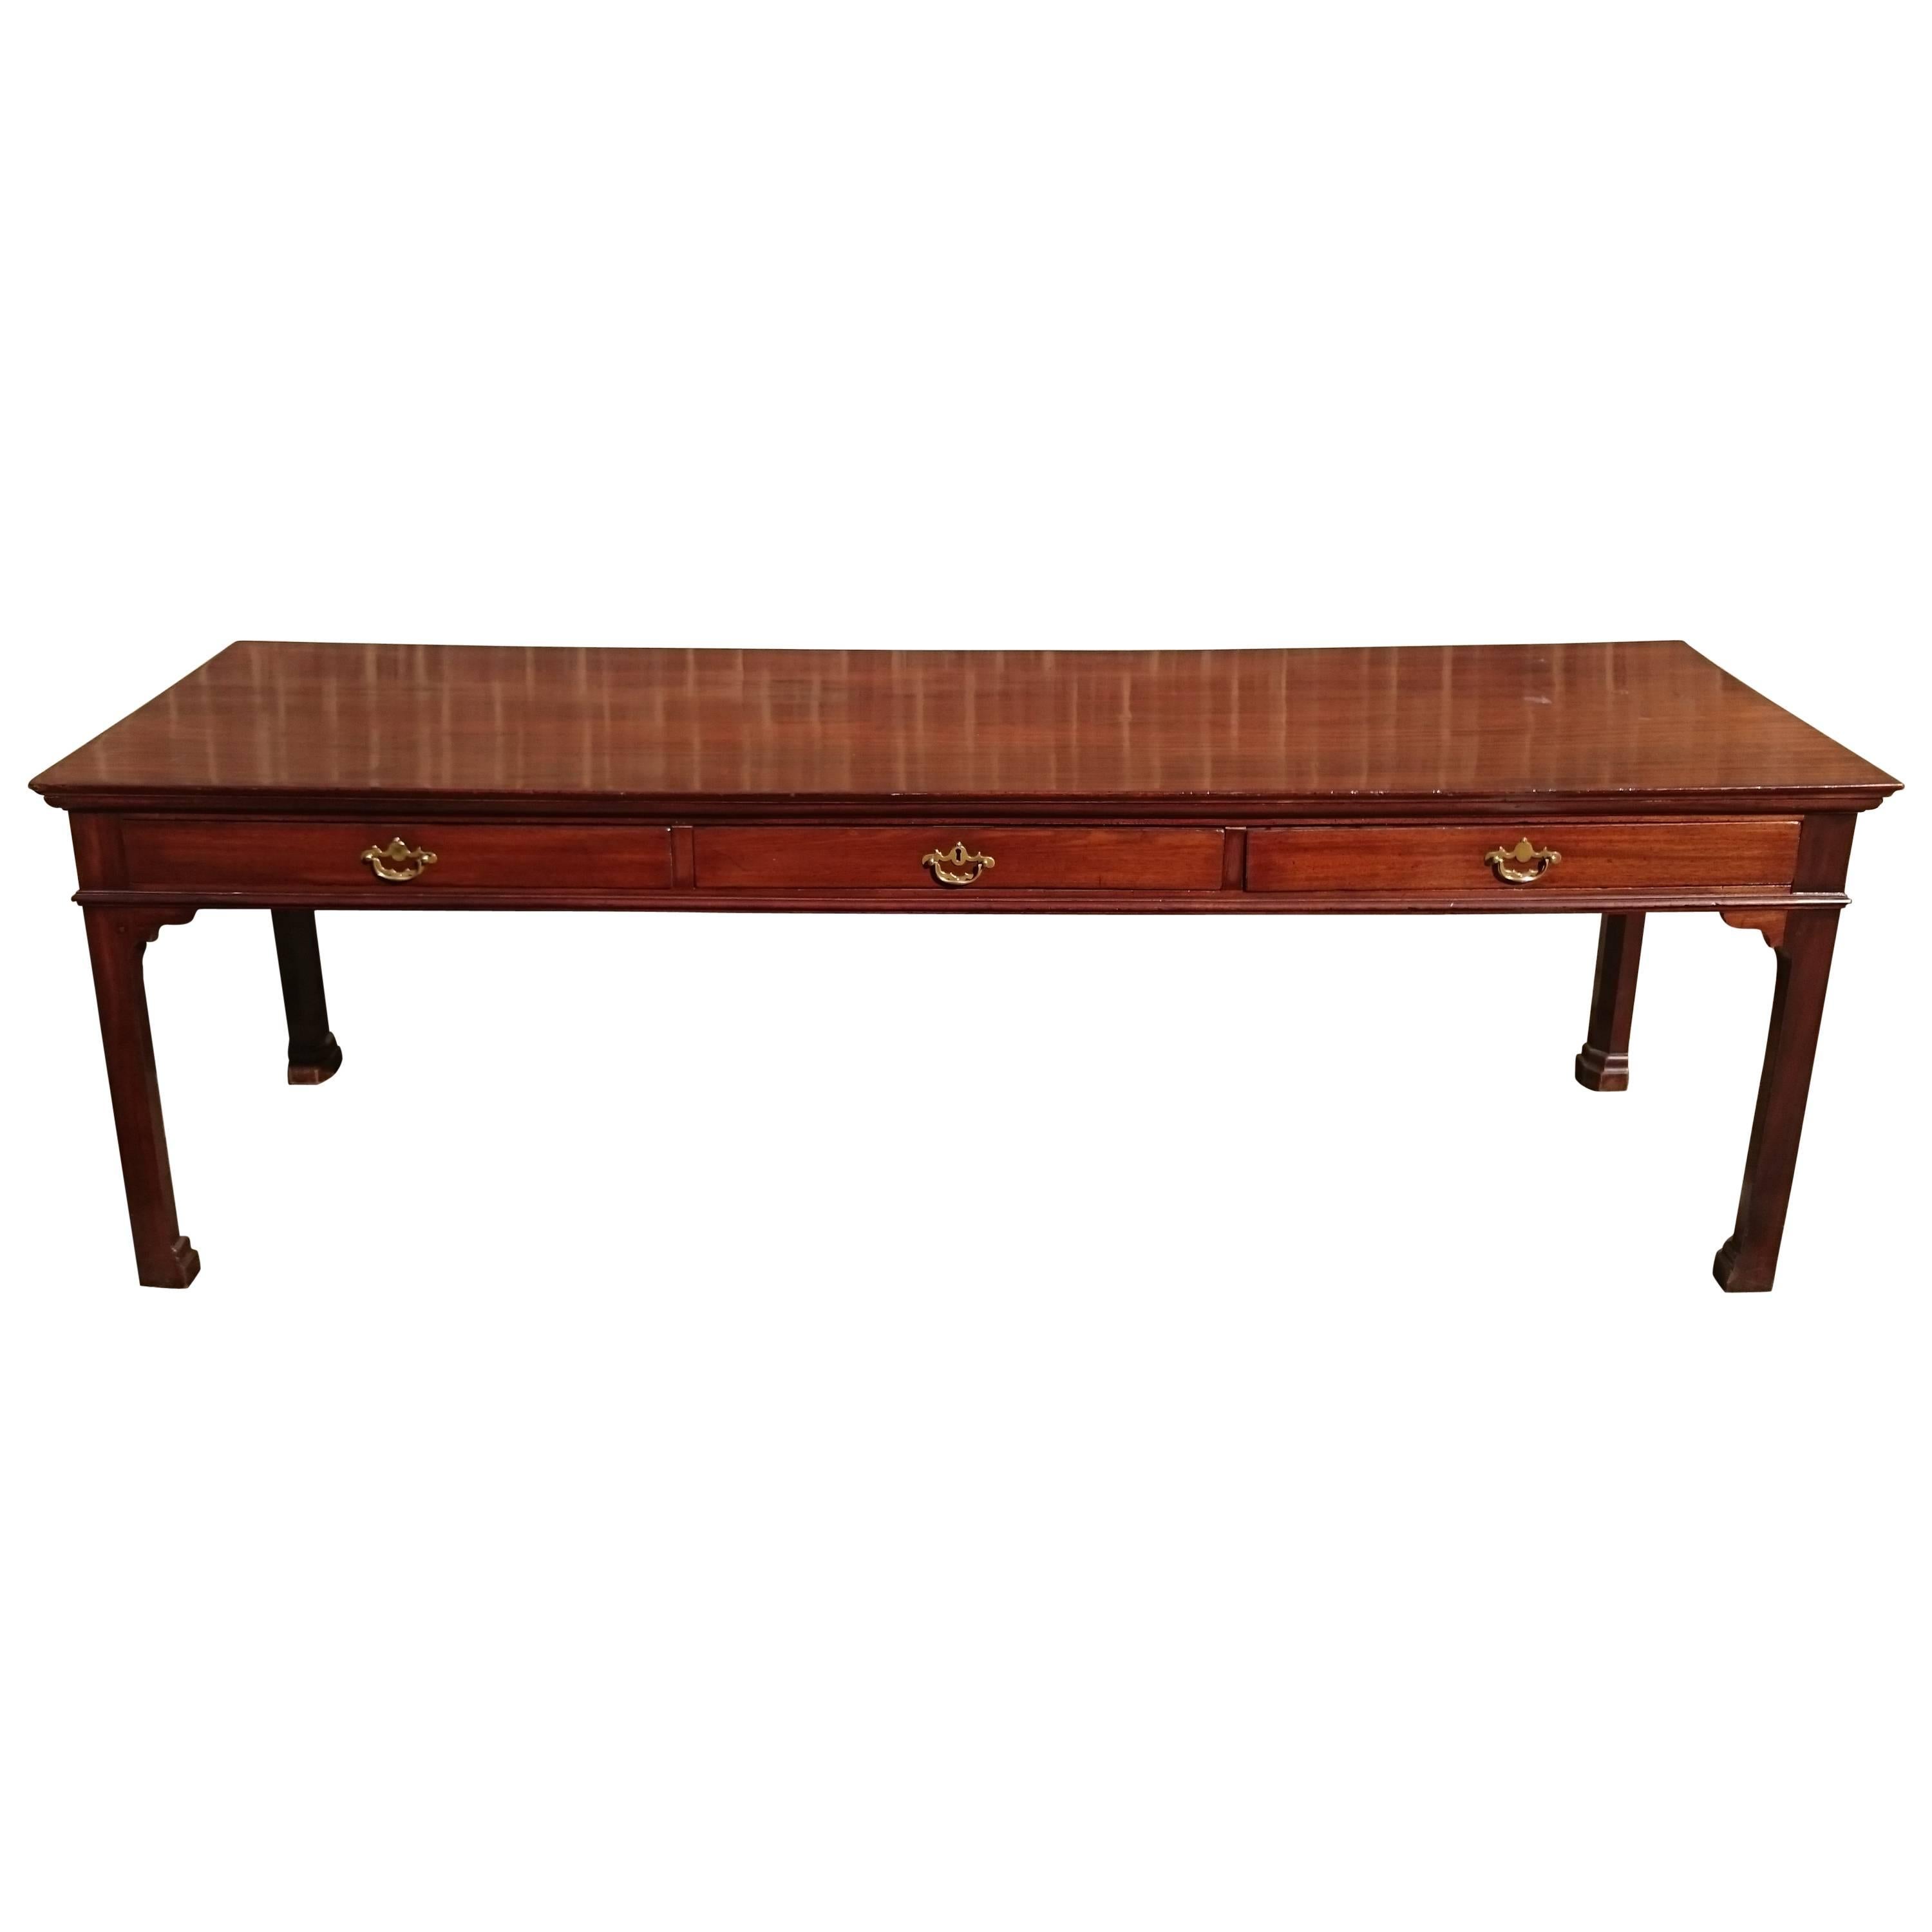 Large-Scale George III Period Mahogany Serving Table For Sale